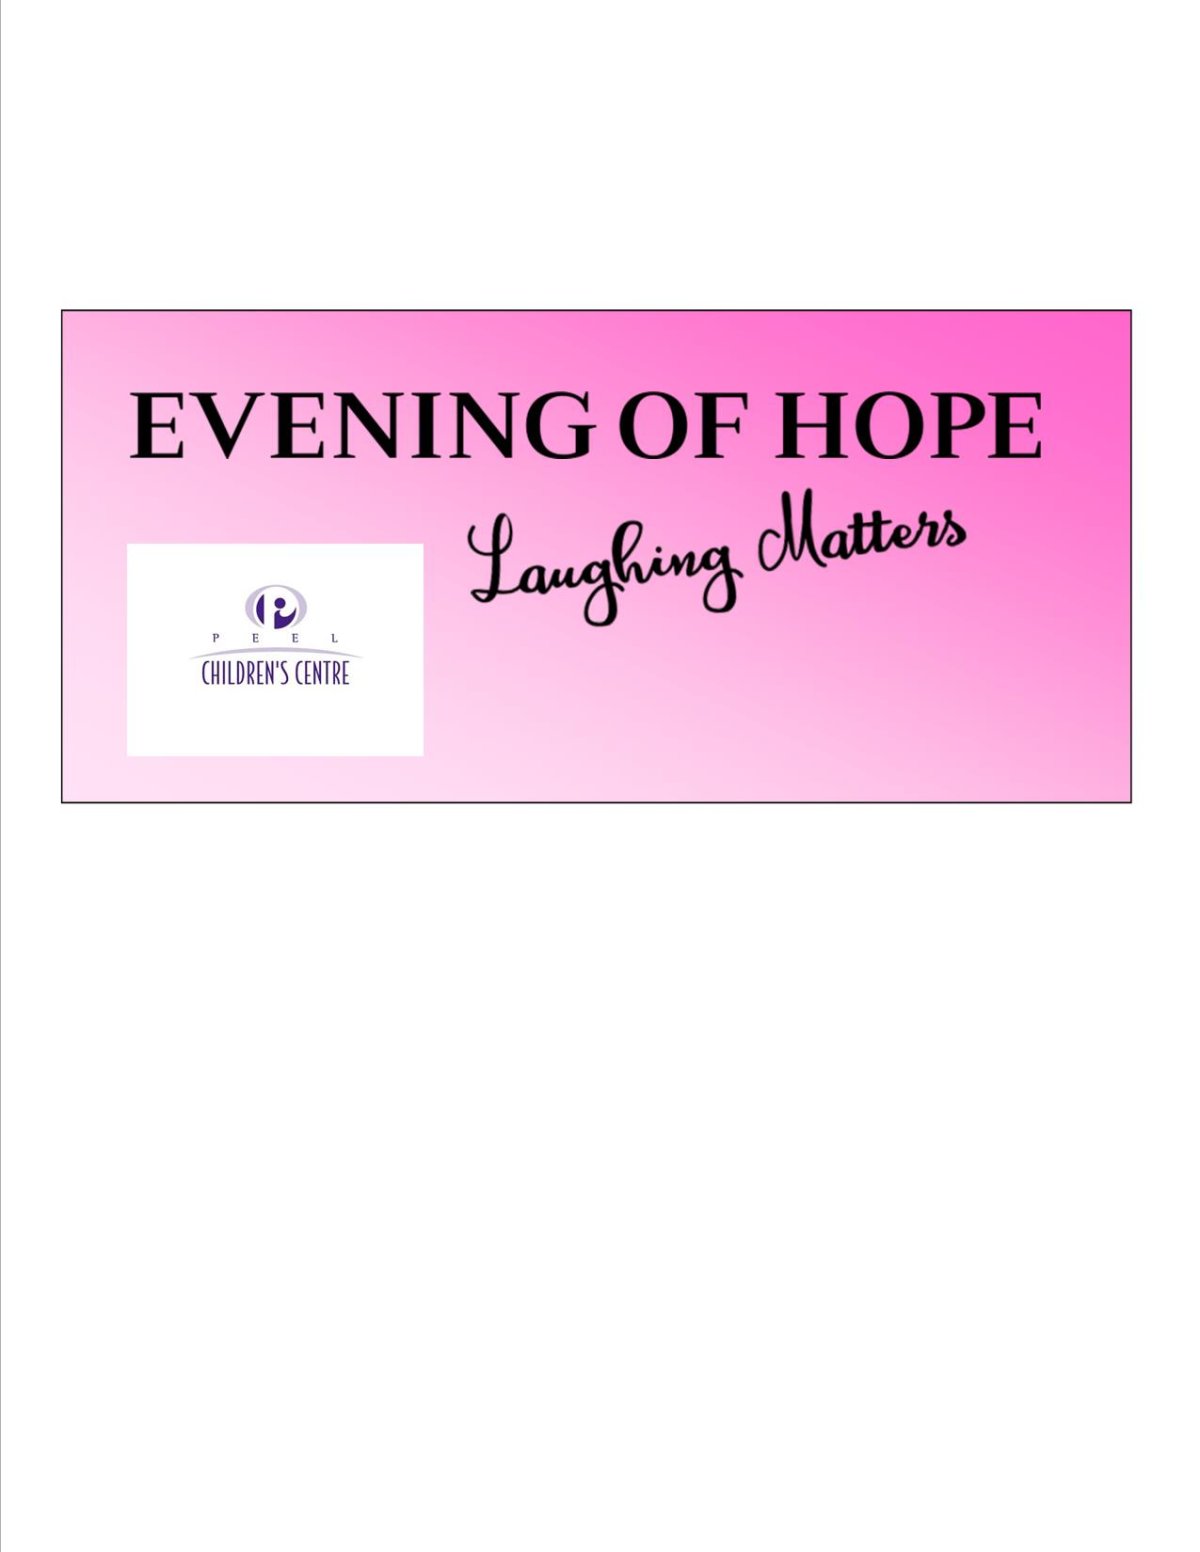 Evening of Hope Gala & Auction ~ Laughing Matters - image